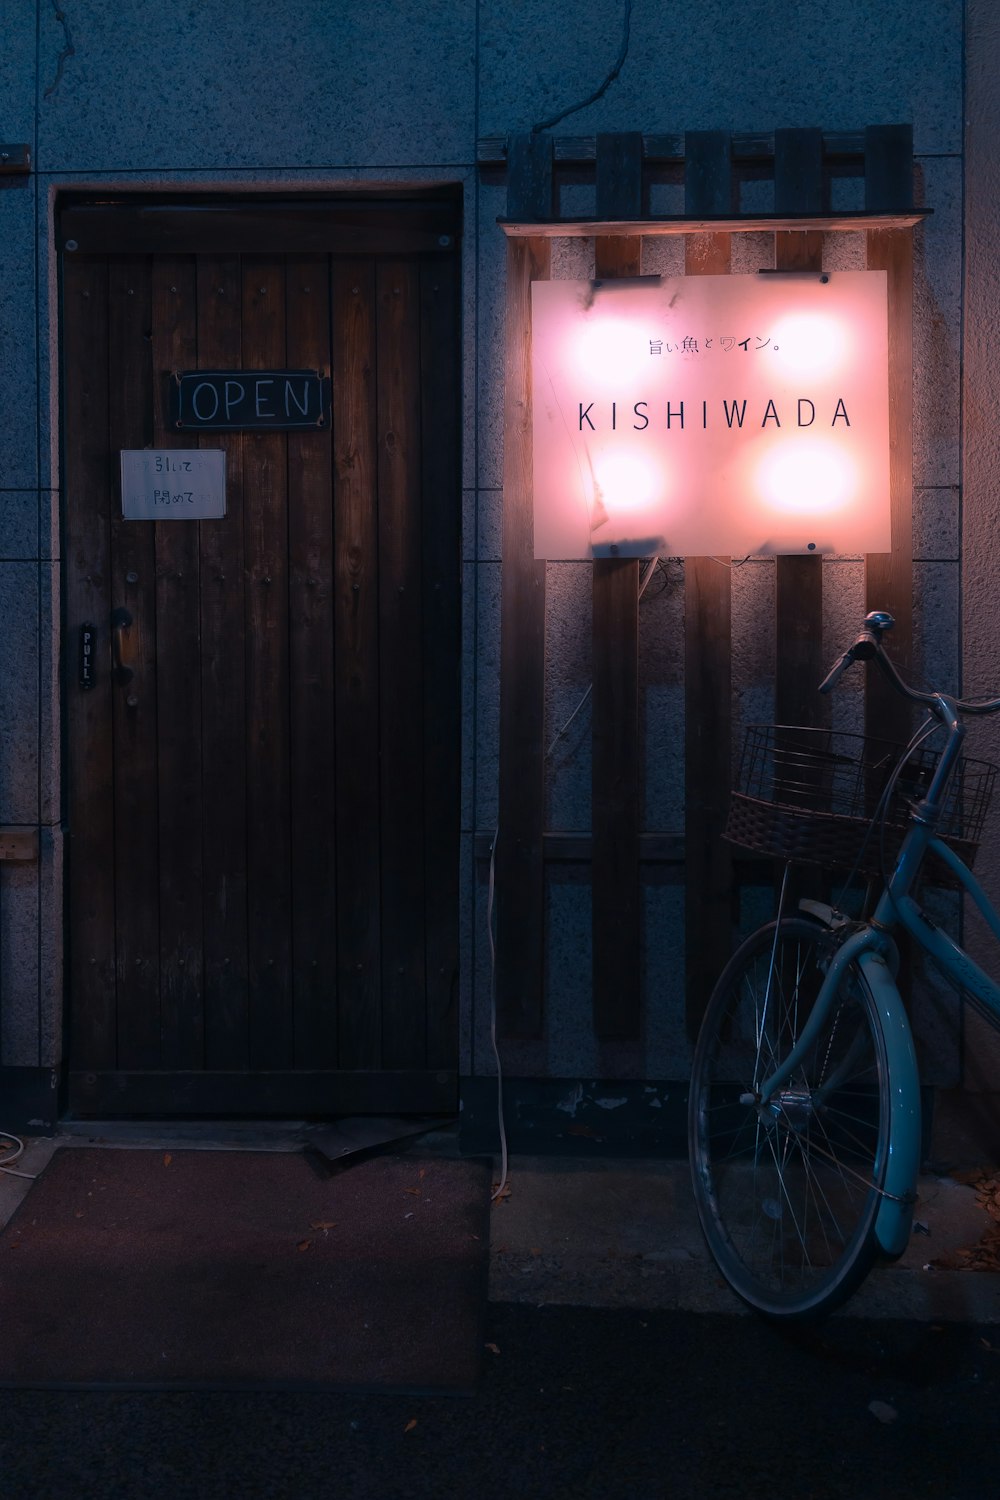 a bicycle is parked outside of a building